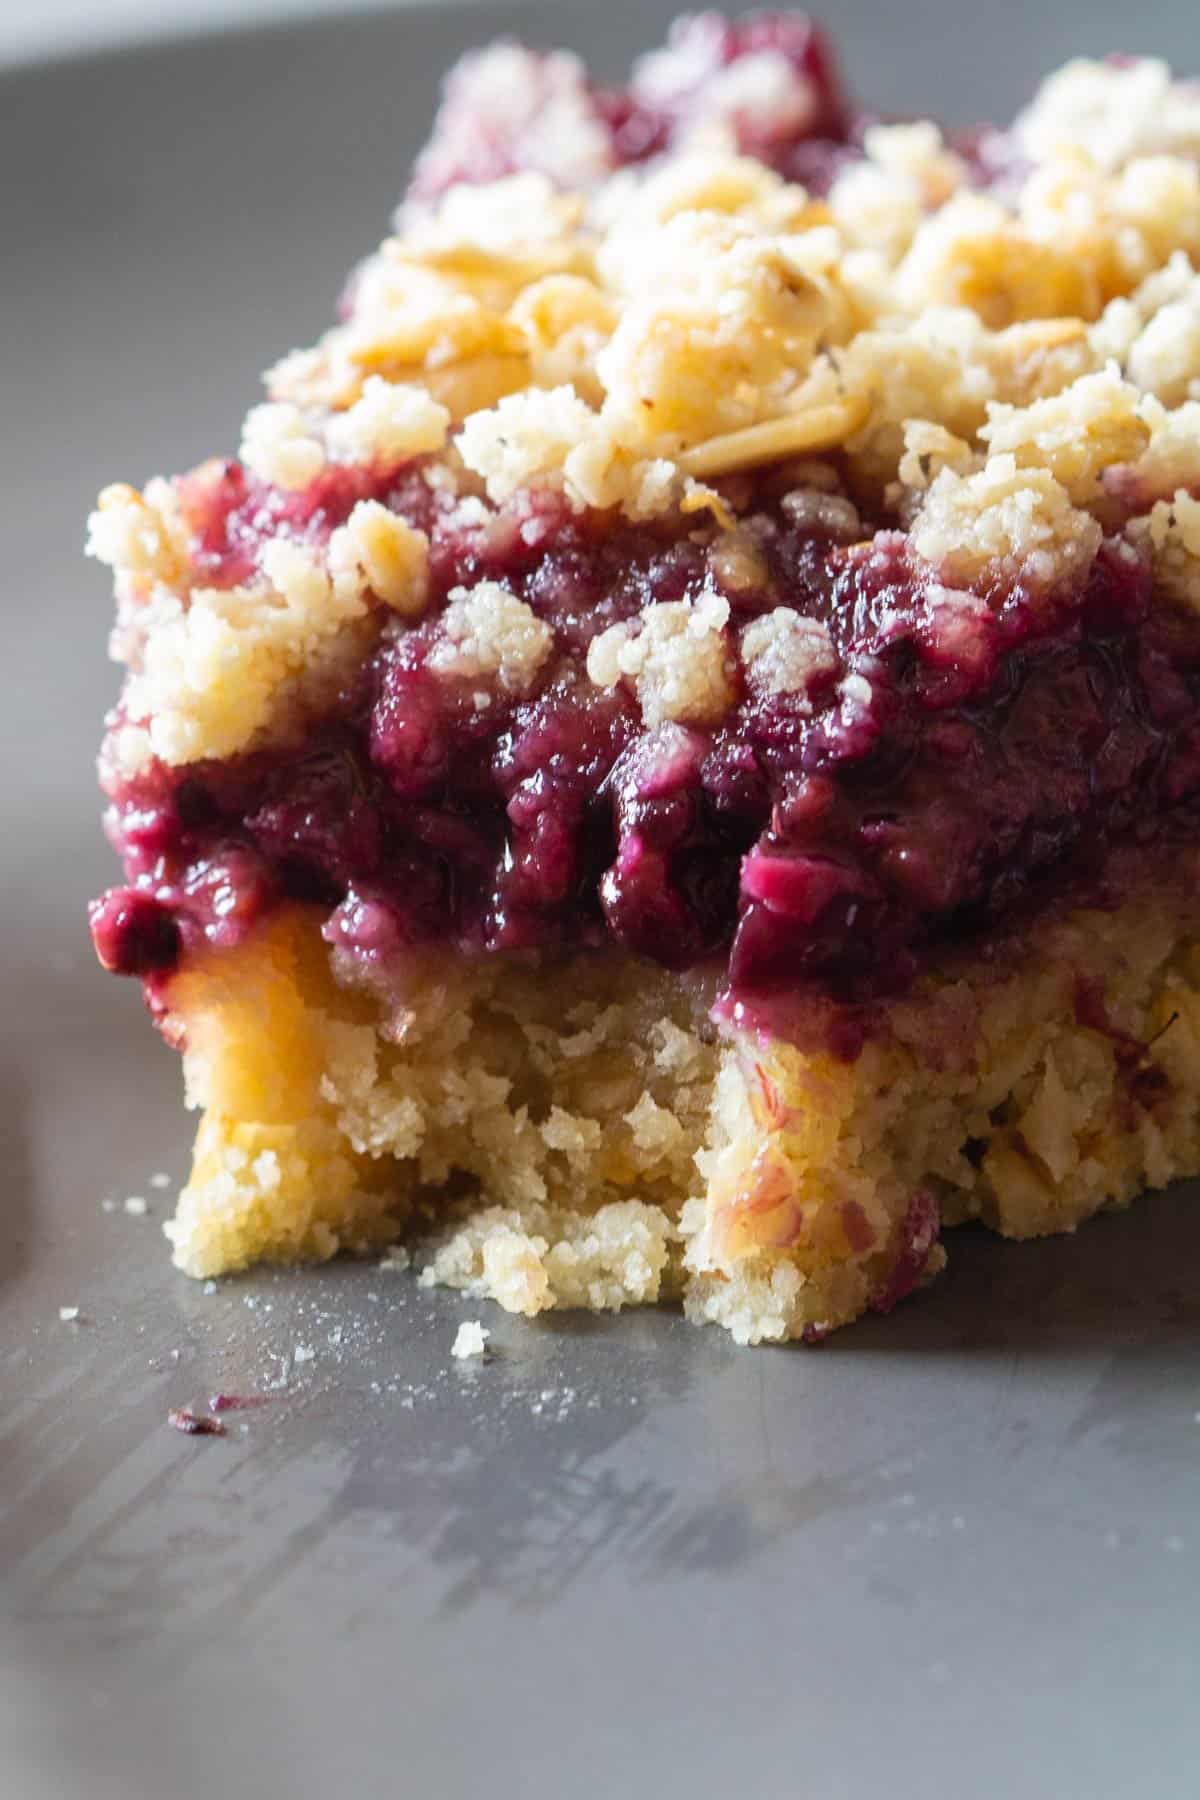 One piece of a Blackberry Pie with crumbles on top.